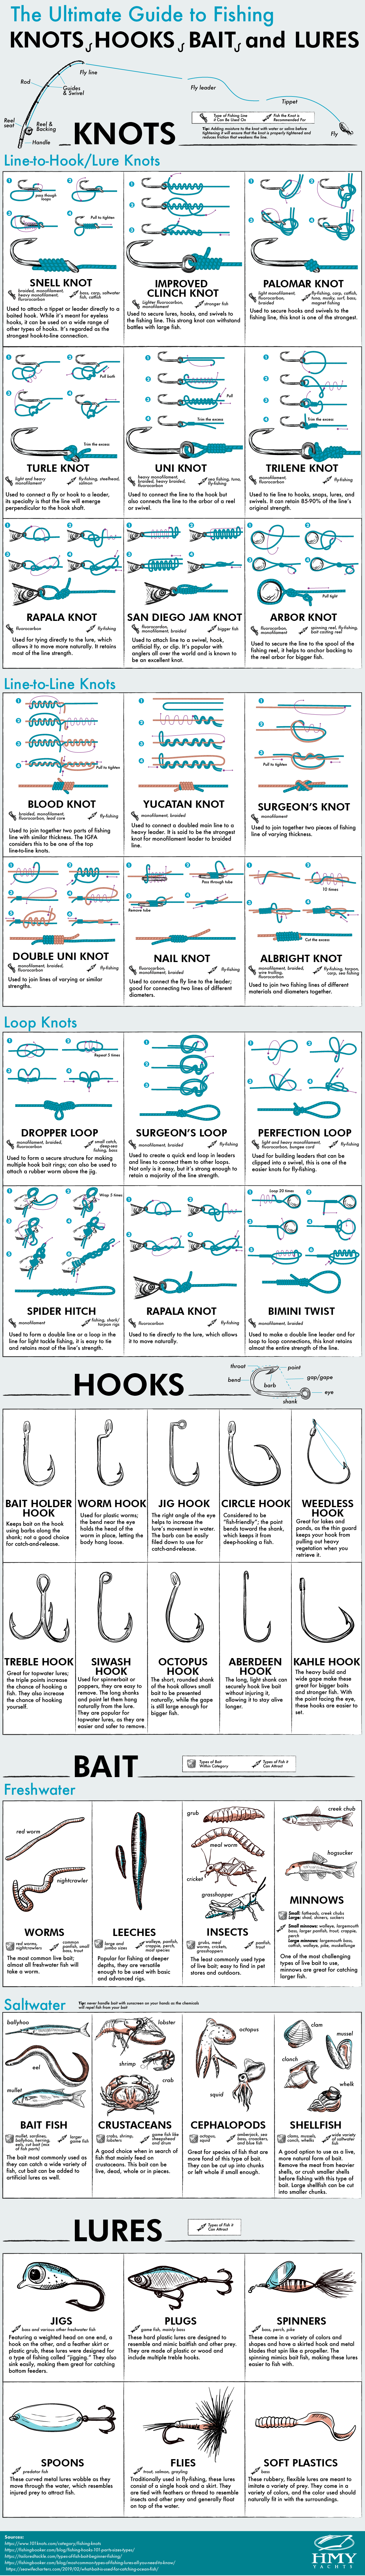 How To Tie Two Fishing Hooks On One Line, Treble Hook Knot